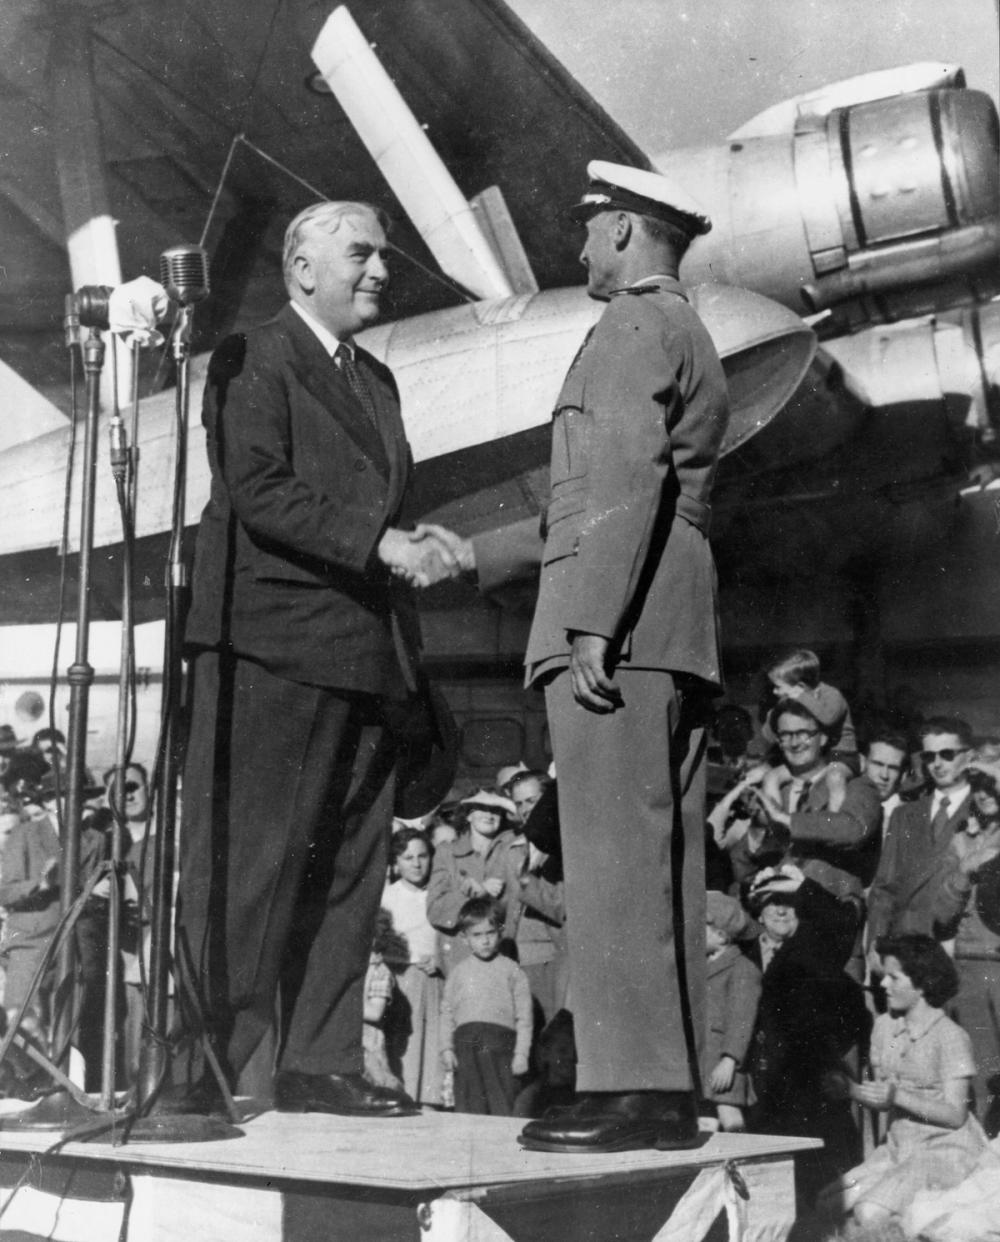 A black and white photograph of a man in a suit and a man in a pilot’s uniform standing on a podium and shaking hands. There is an audience of people behind them. Silver plane visible in the background.